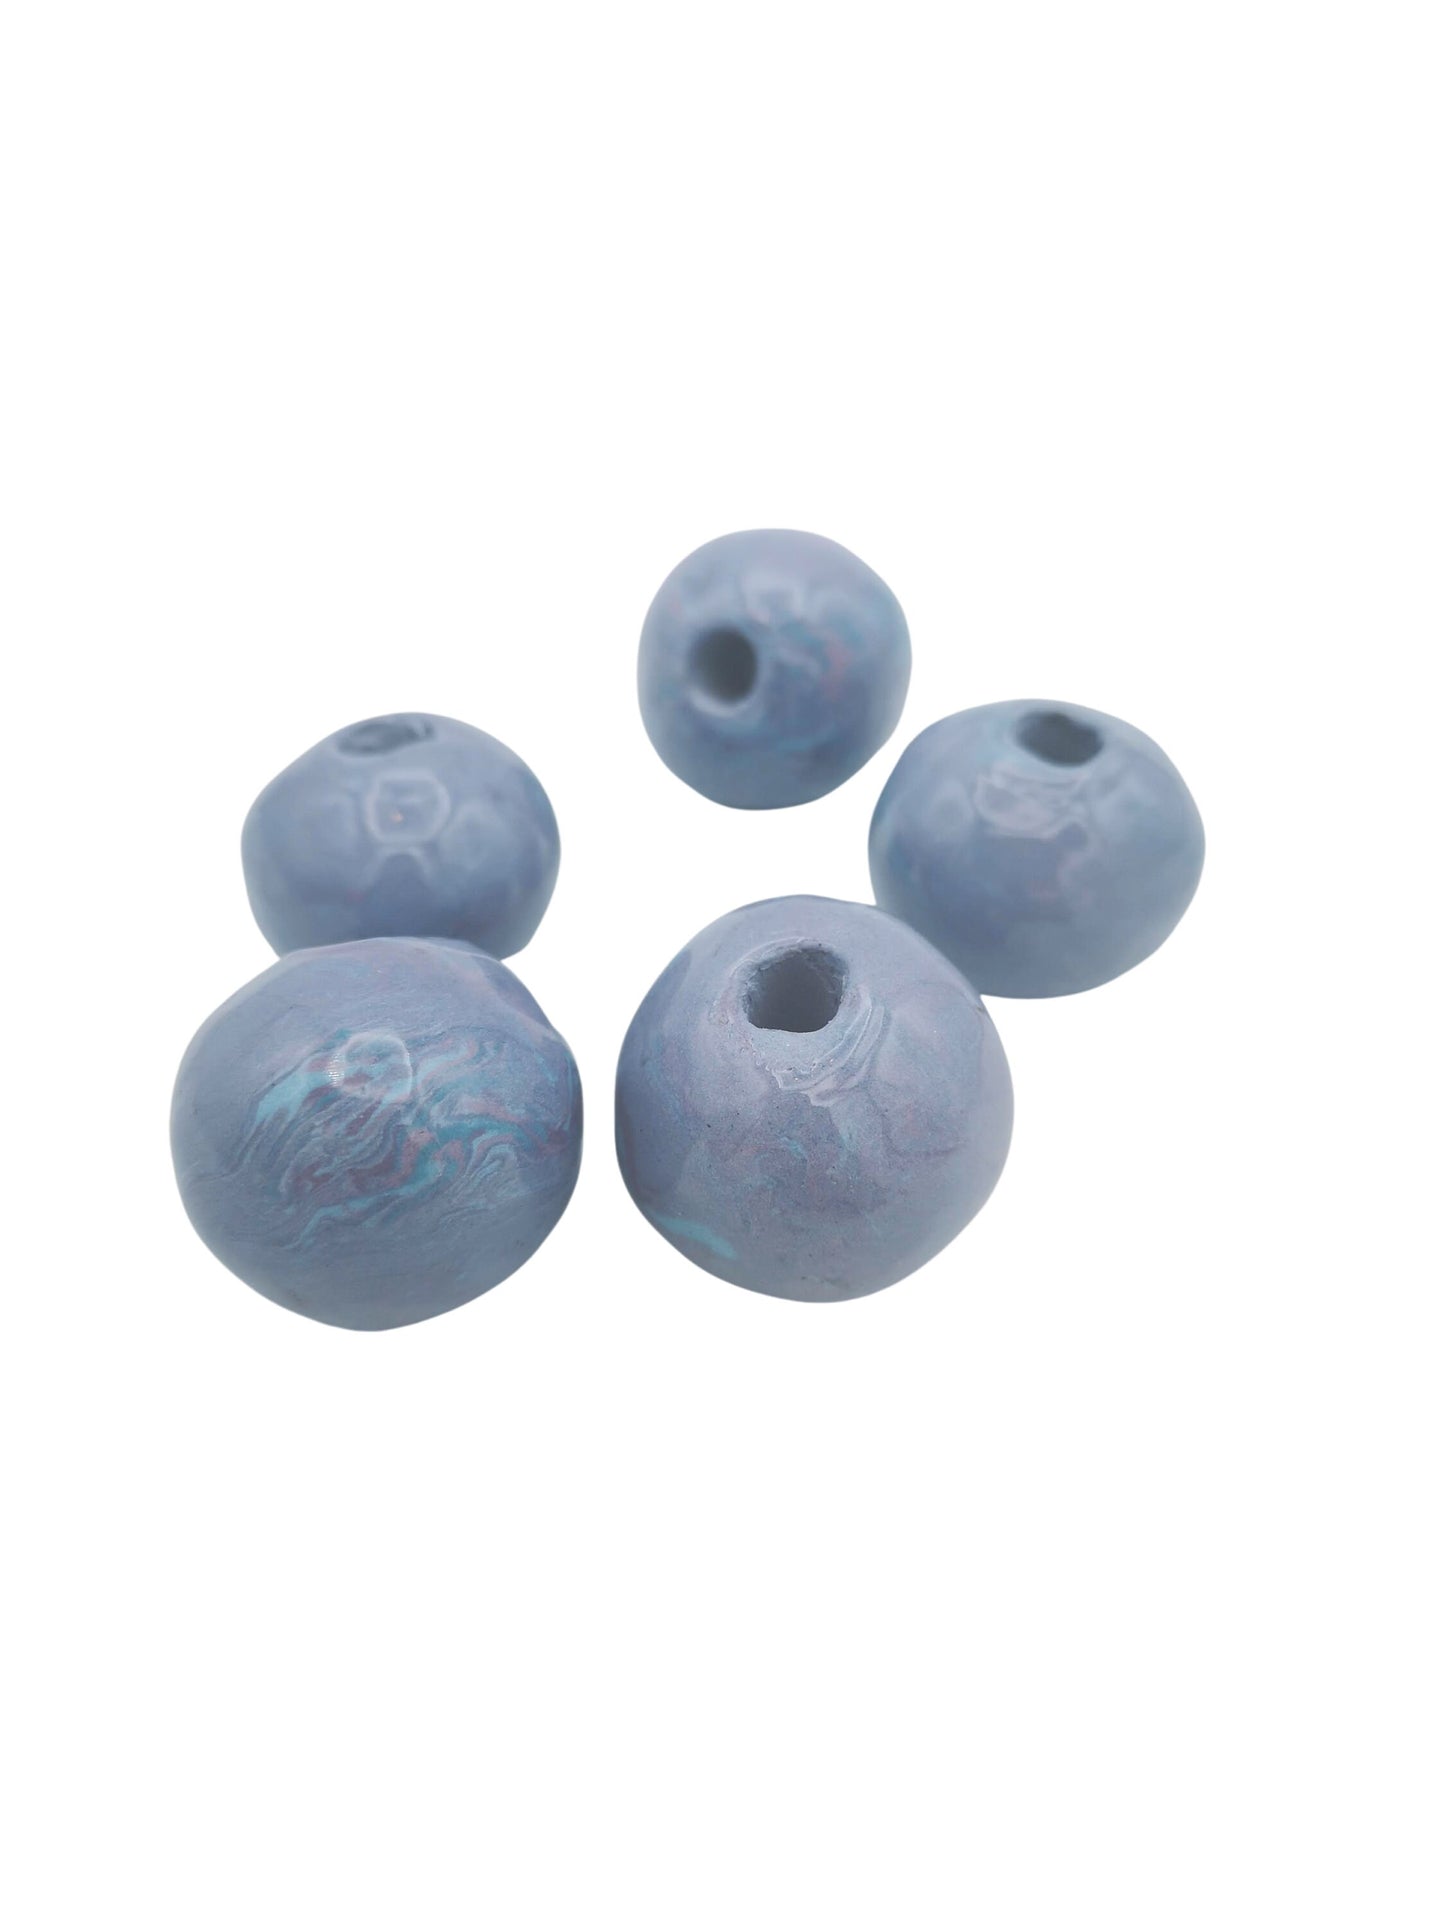 1Pc 30mm Extra Large Bead For Macrame, Marbled Handmade Ceramic 7mm Large Hole Beads For Chunky Jewelry Making, Unique Purple And Blue Beads - Ceramica Ana Rafael